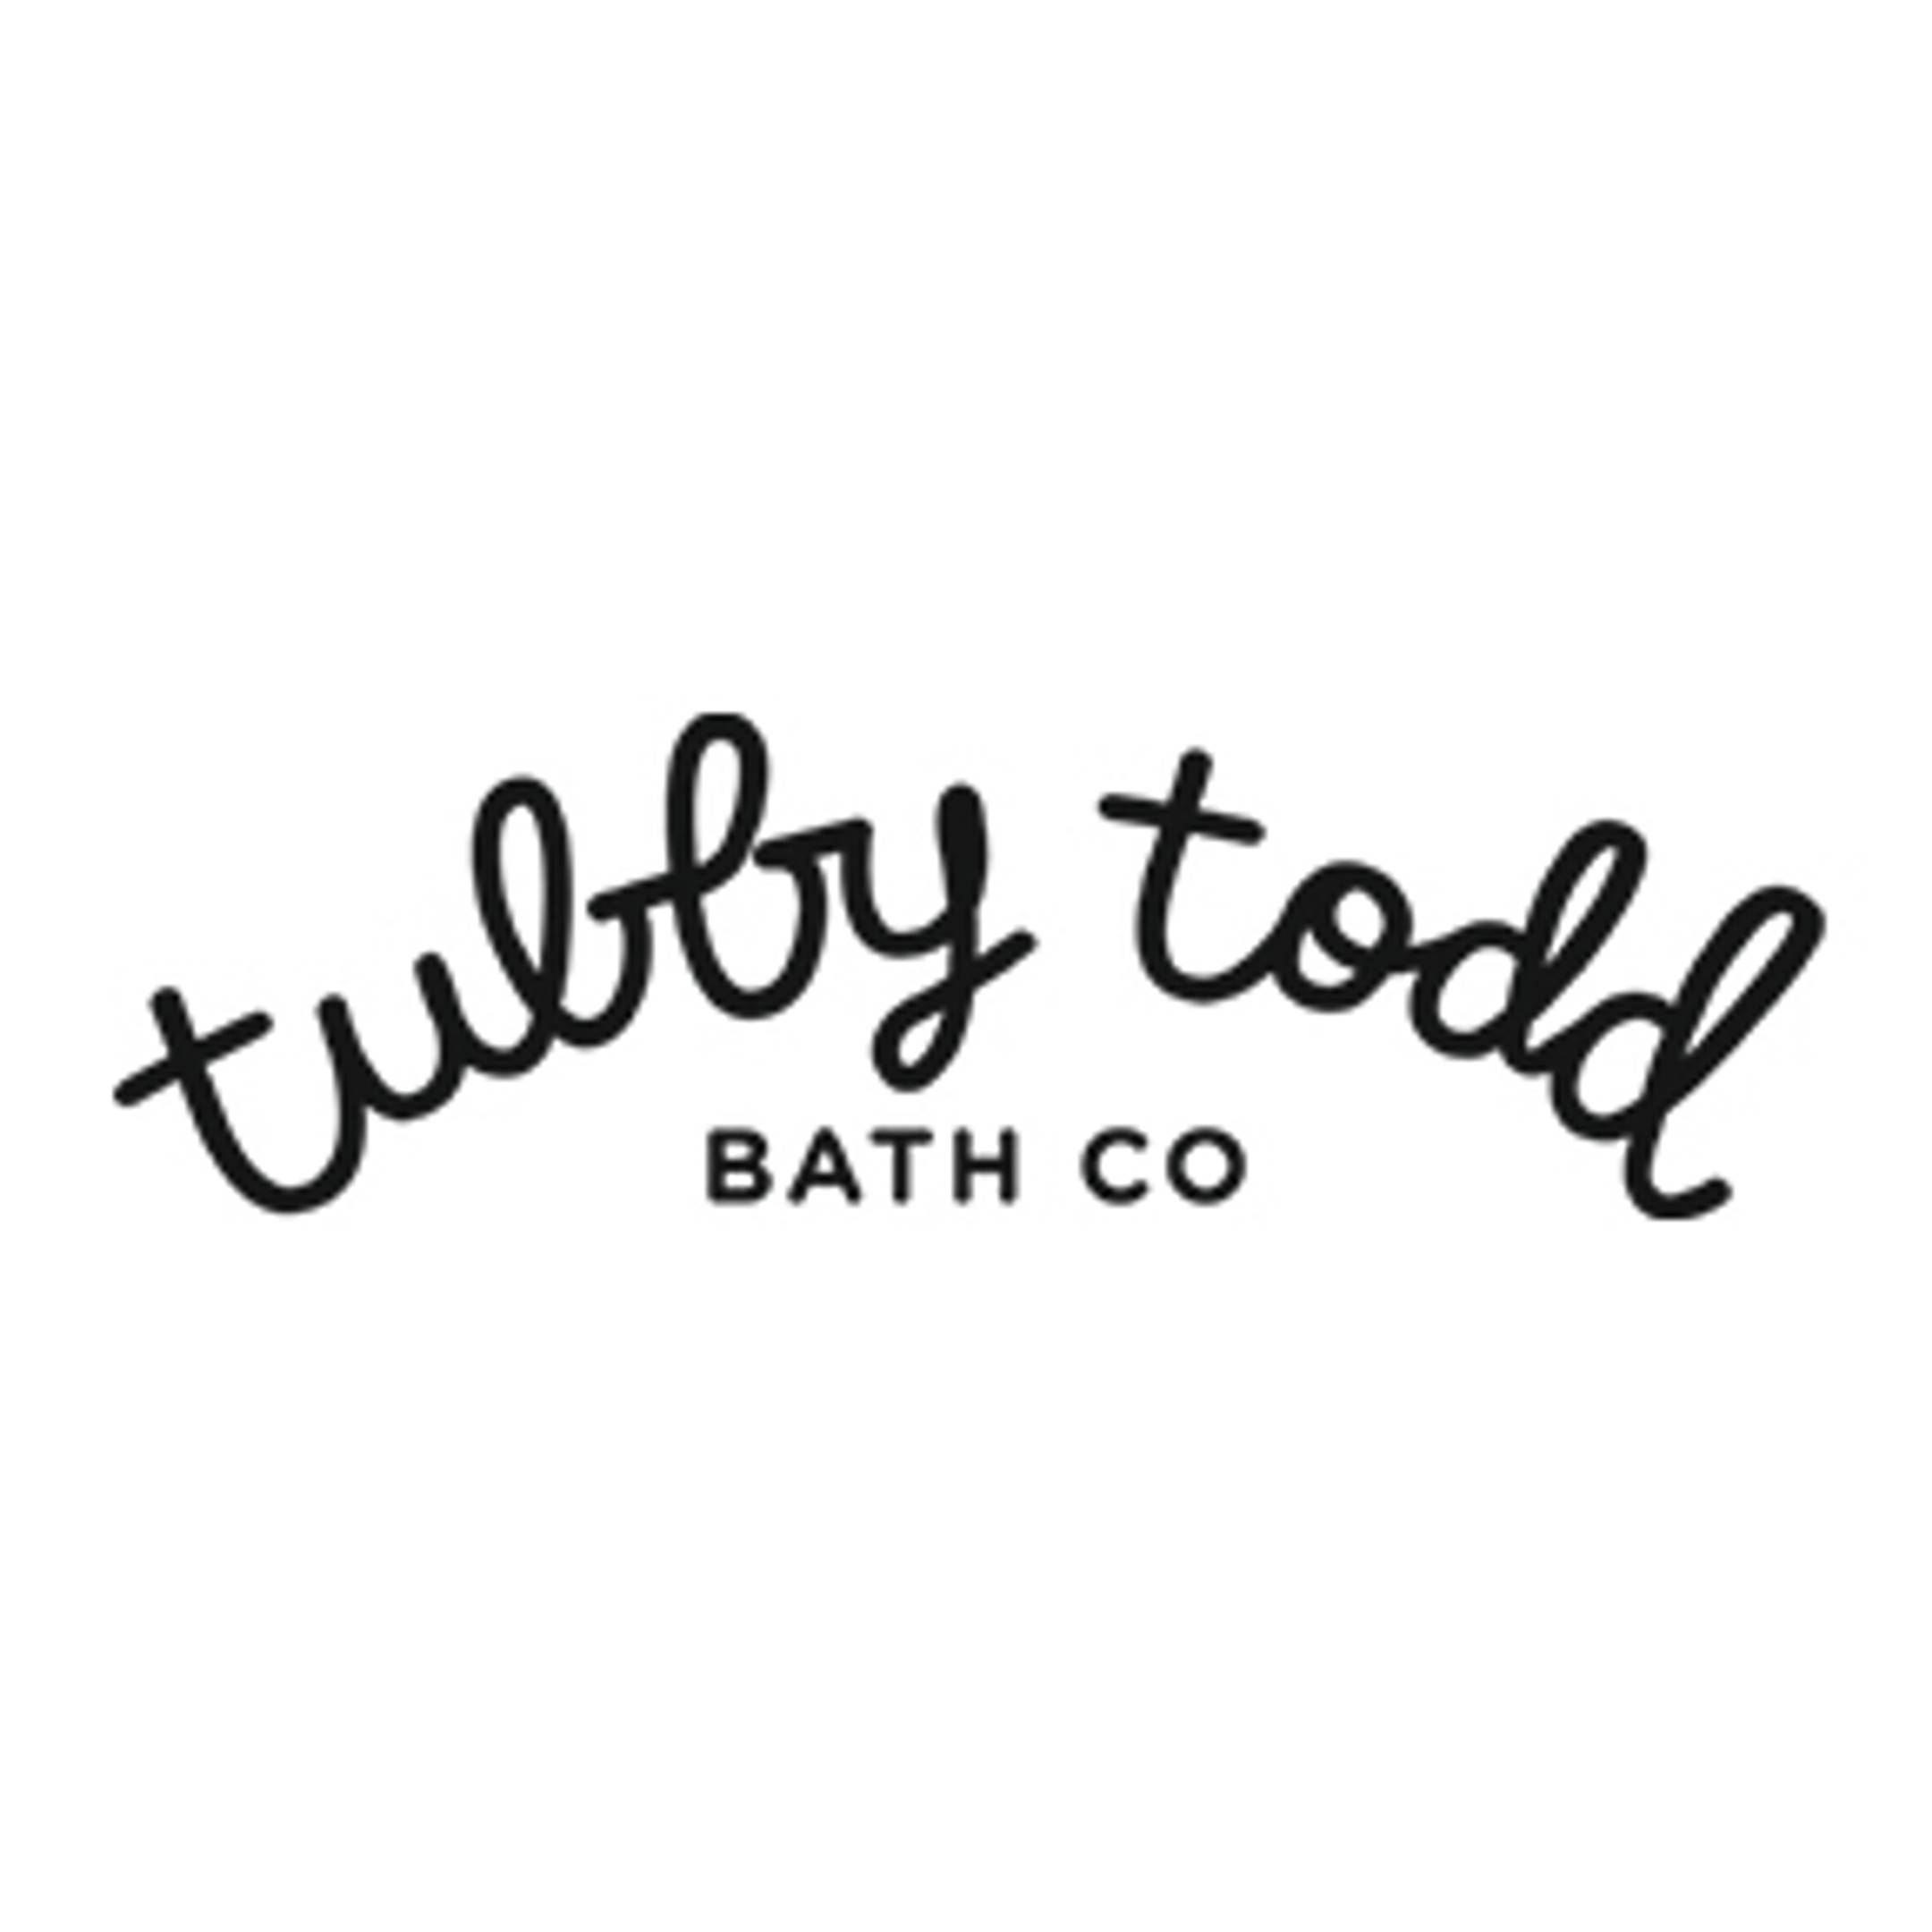 Tubby Todd